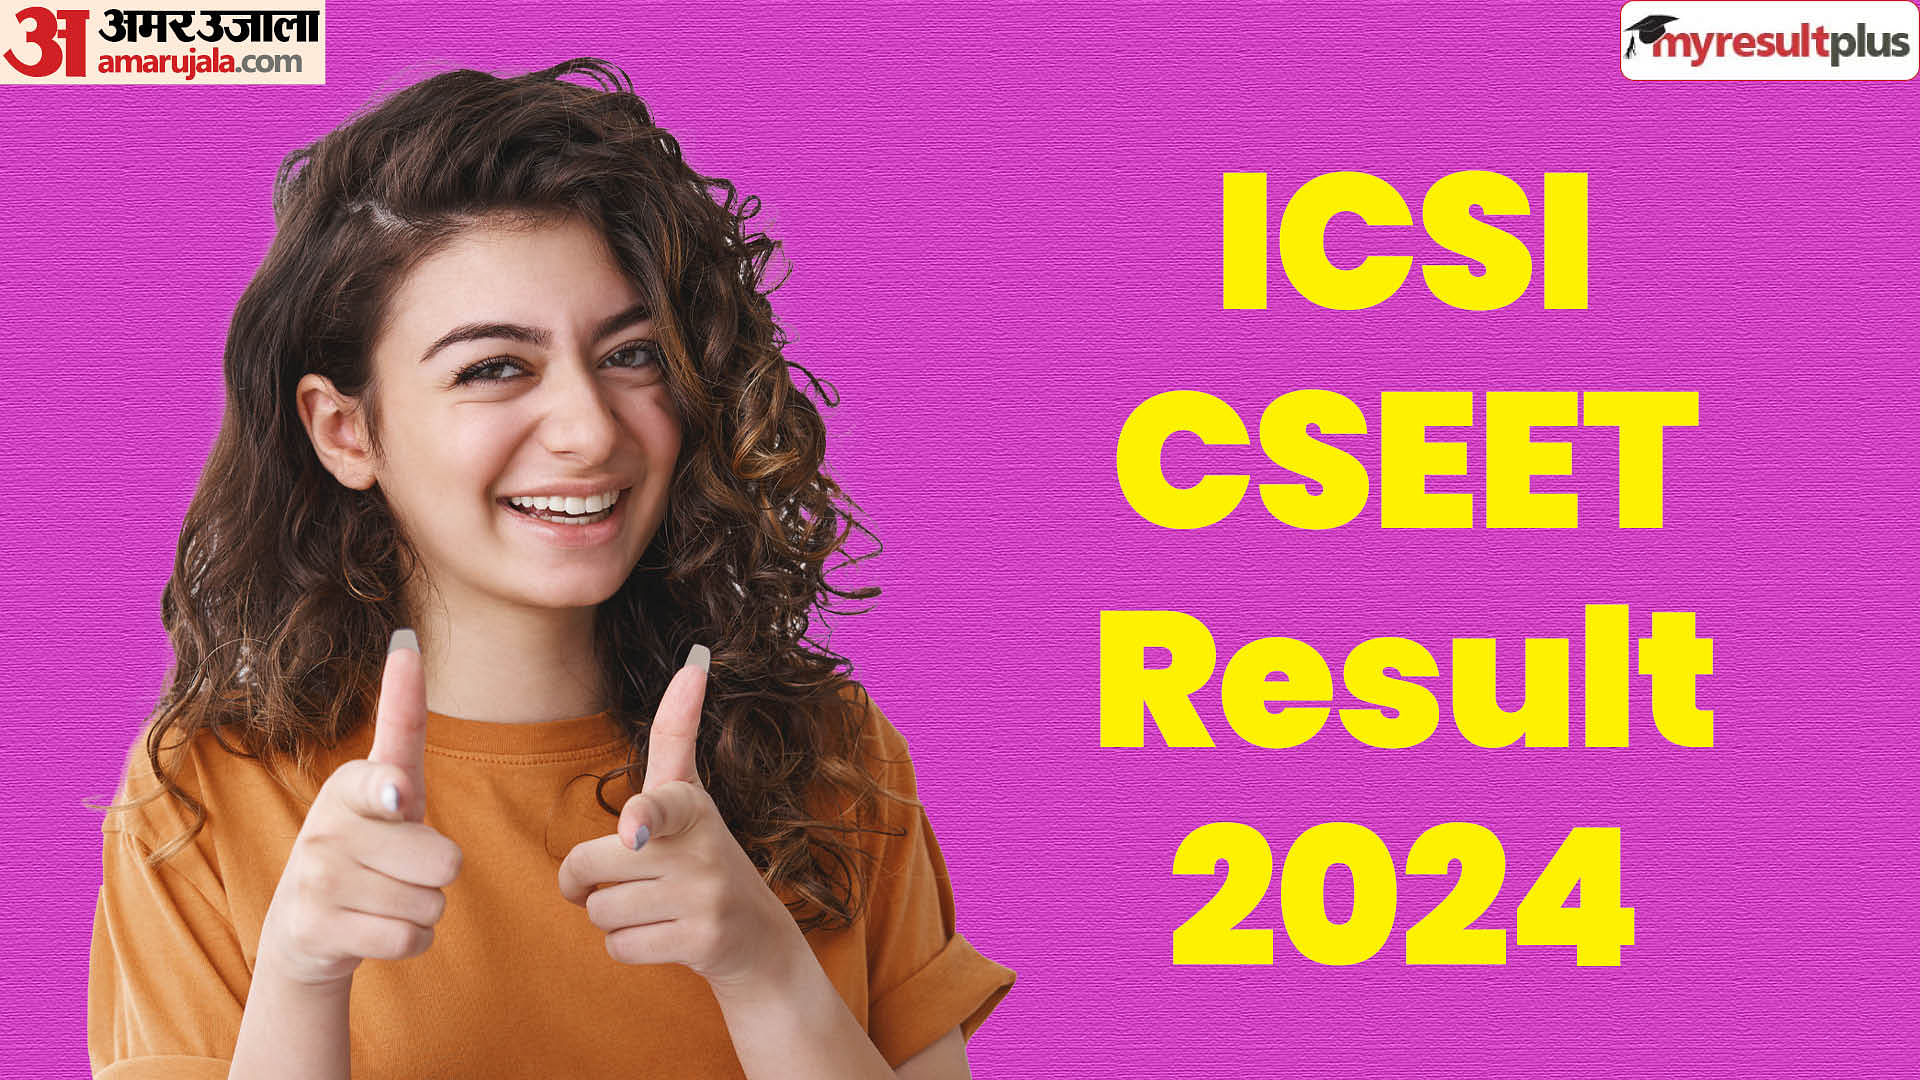 ICSI CSEET result 2024 tomorrow; Check time, qualifying criteria and how to download